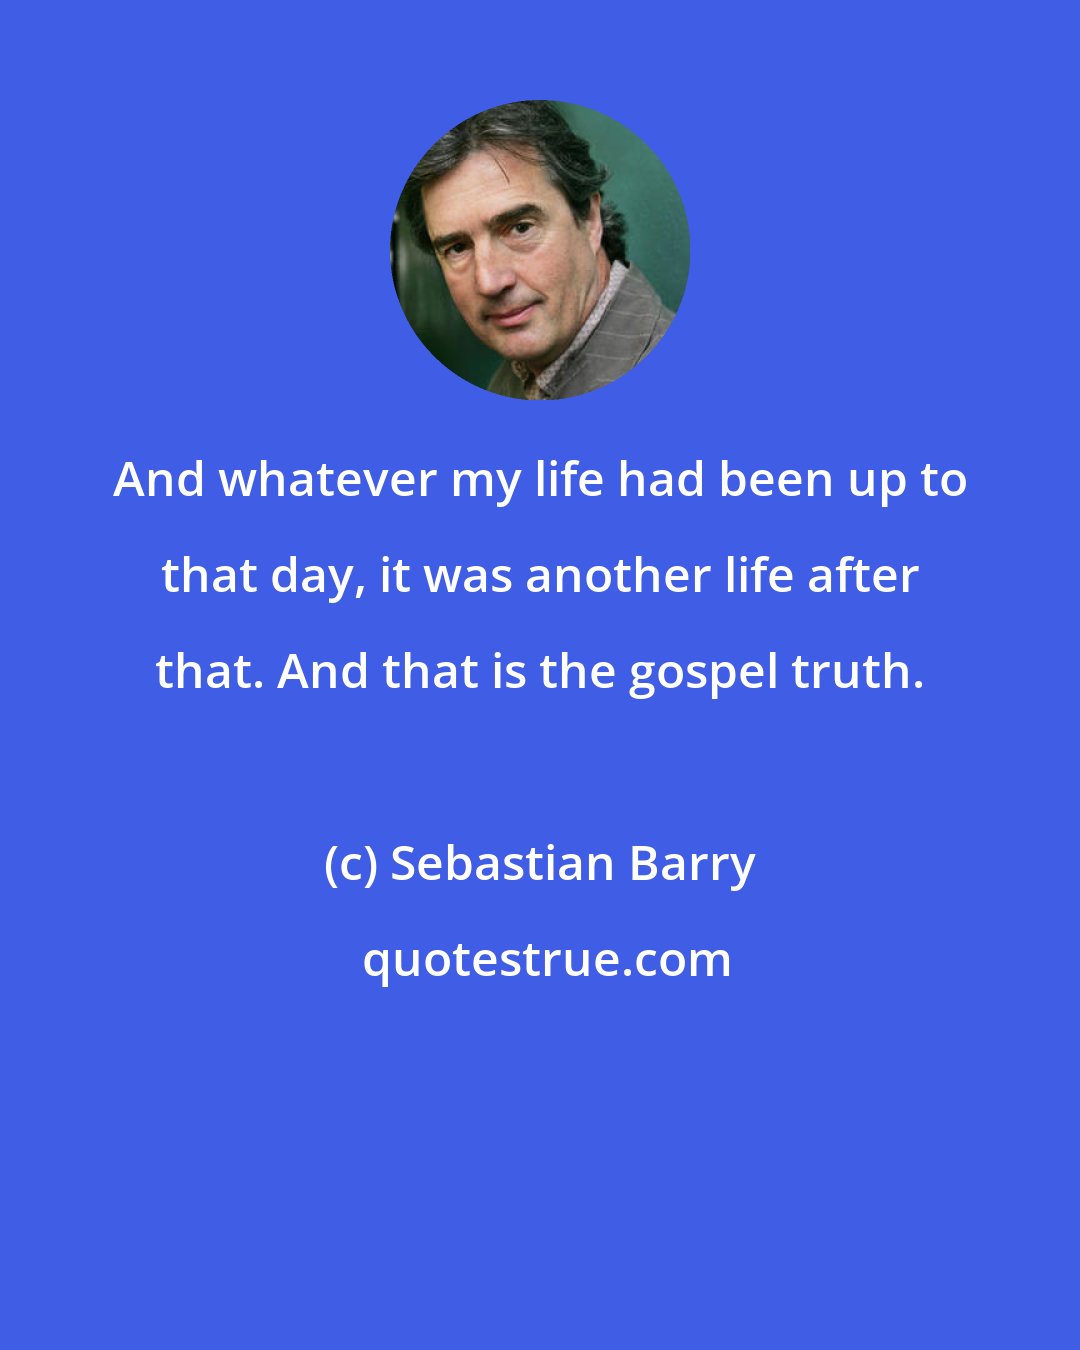 Sebastian Barry: And whatever my life had been up to that day, it was another life after that. And that is the gospel truth.